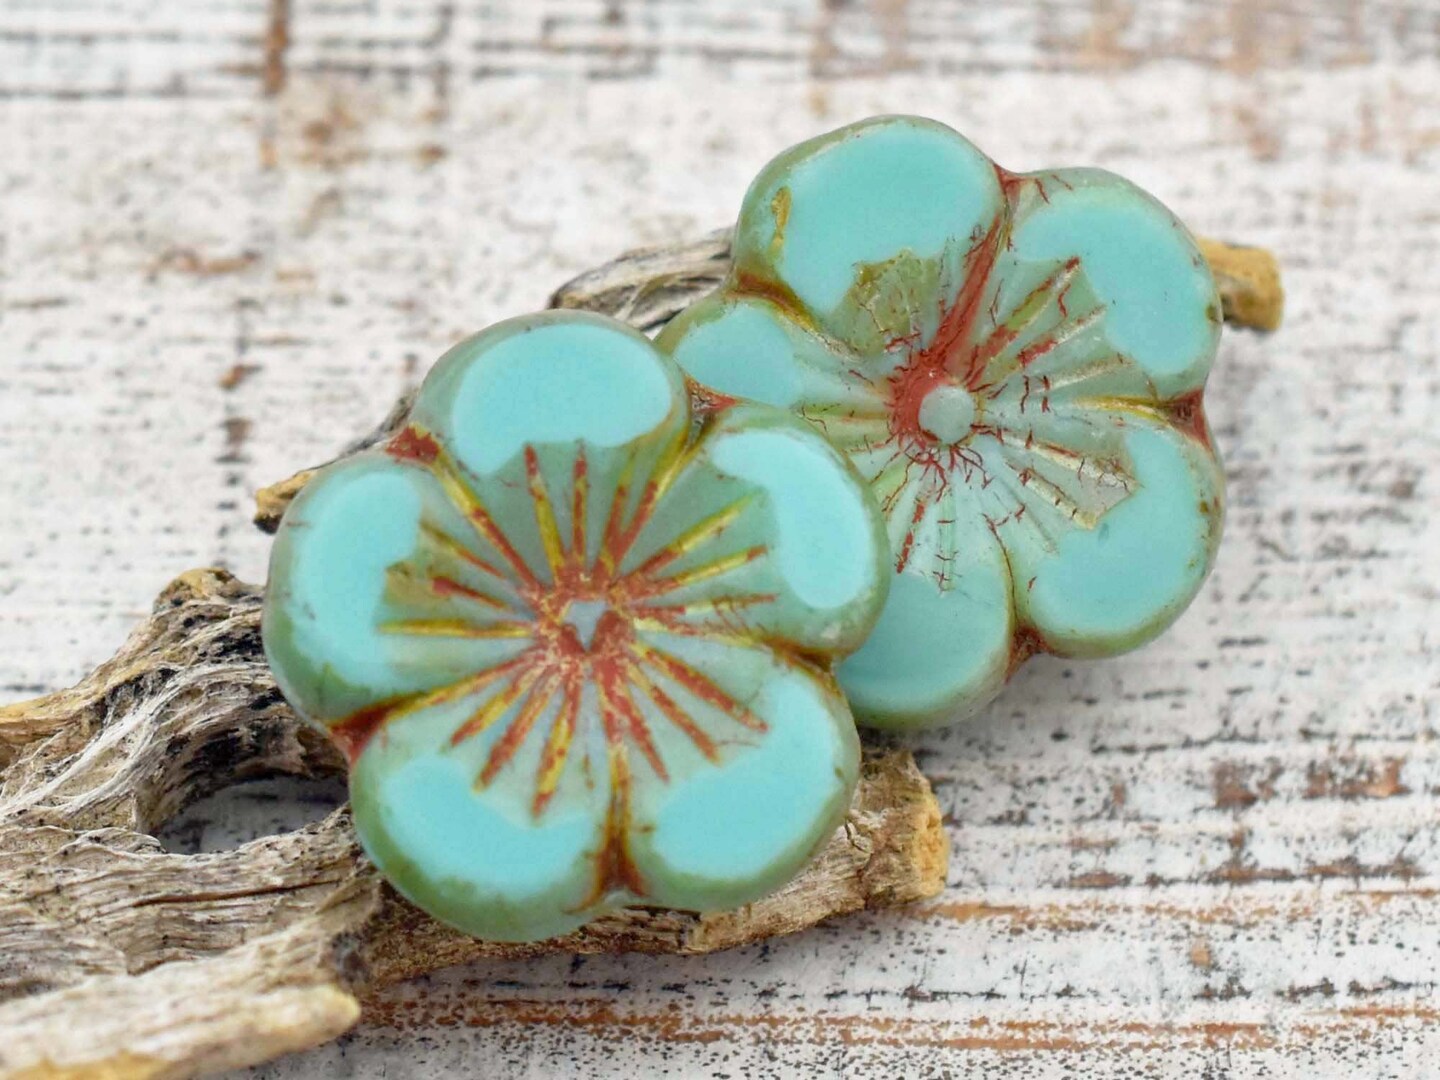 21mm Turquoise Picasso Hibiscus Flower Bead - 2 Beads